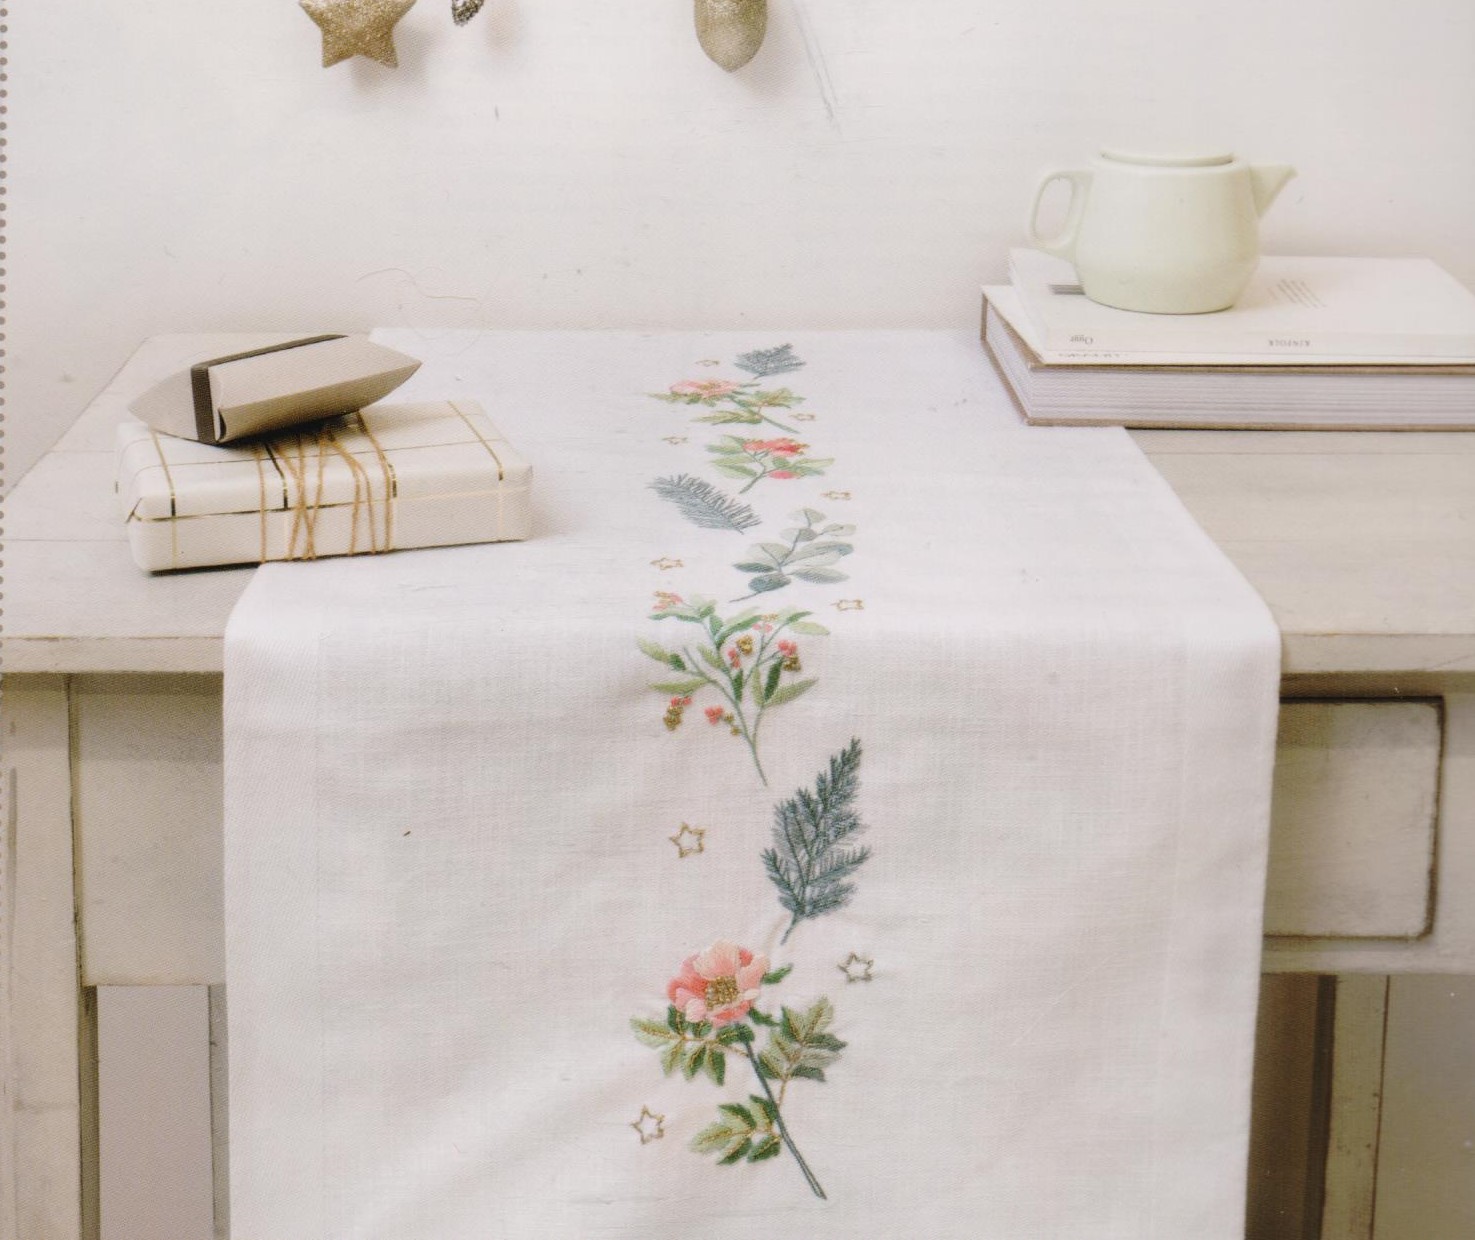 How To Obtain Embroidery Patterns For Table Runners